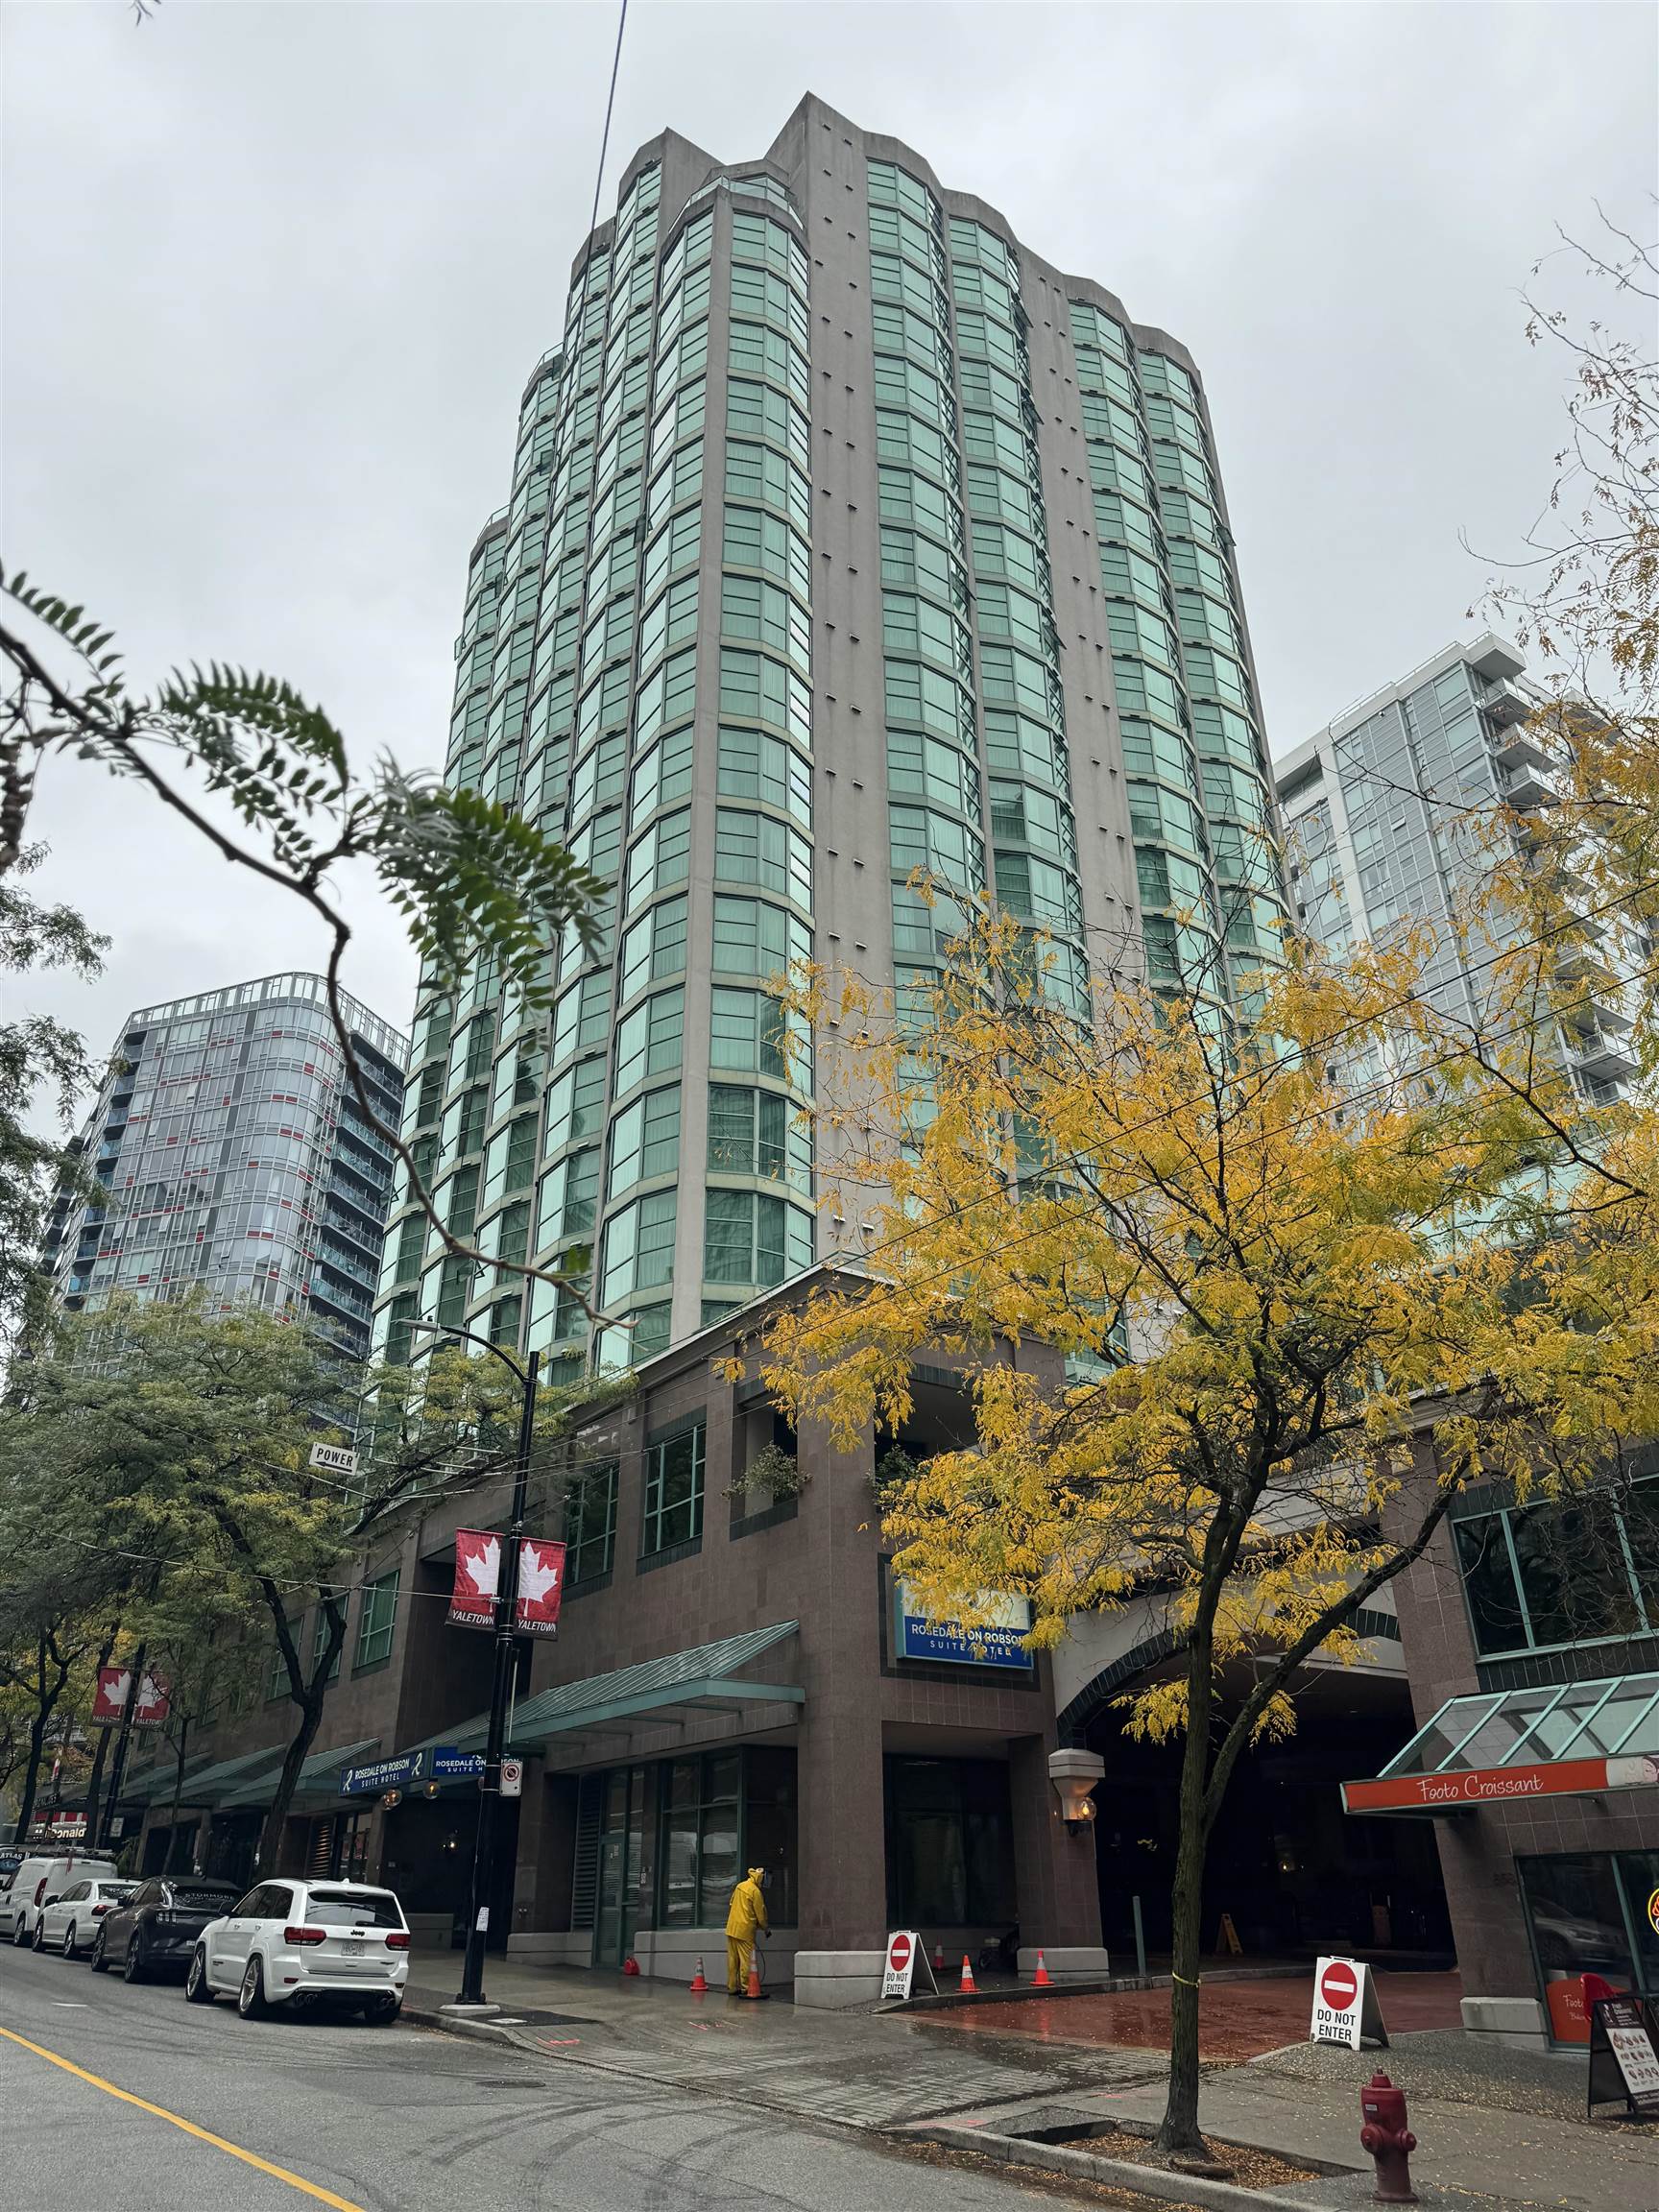 Michael Sung, 1609-838 HAMILTON STREET, Vancouver, British Columbia, 2 Bedrooms, 1 Bathroom, Residential Attached,For Sale ,R2819886